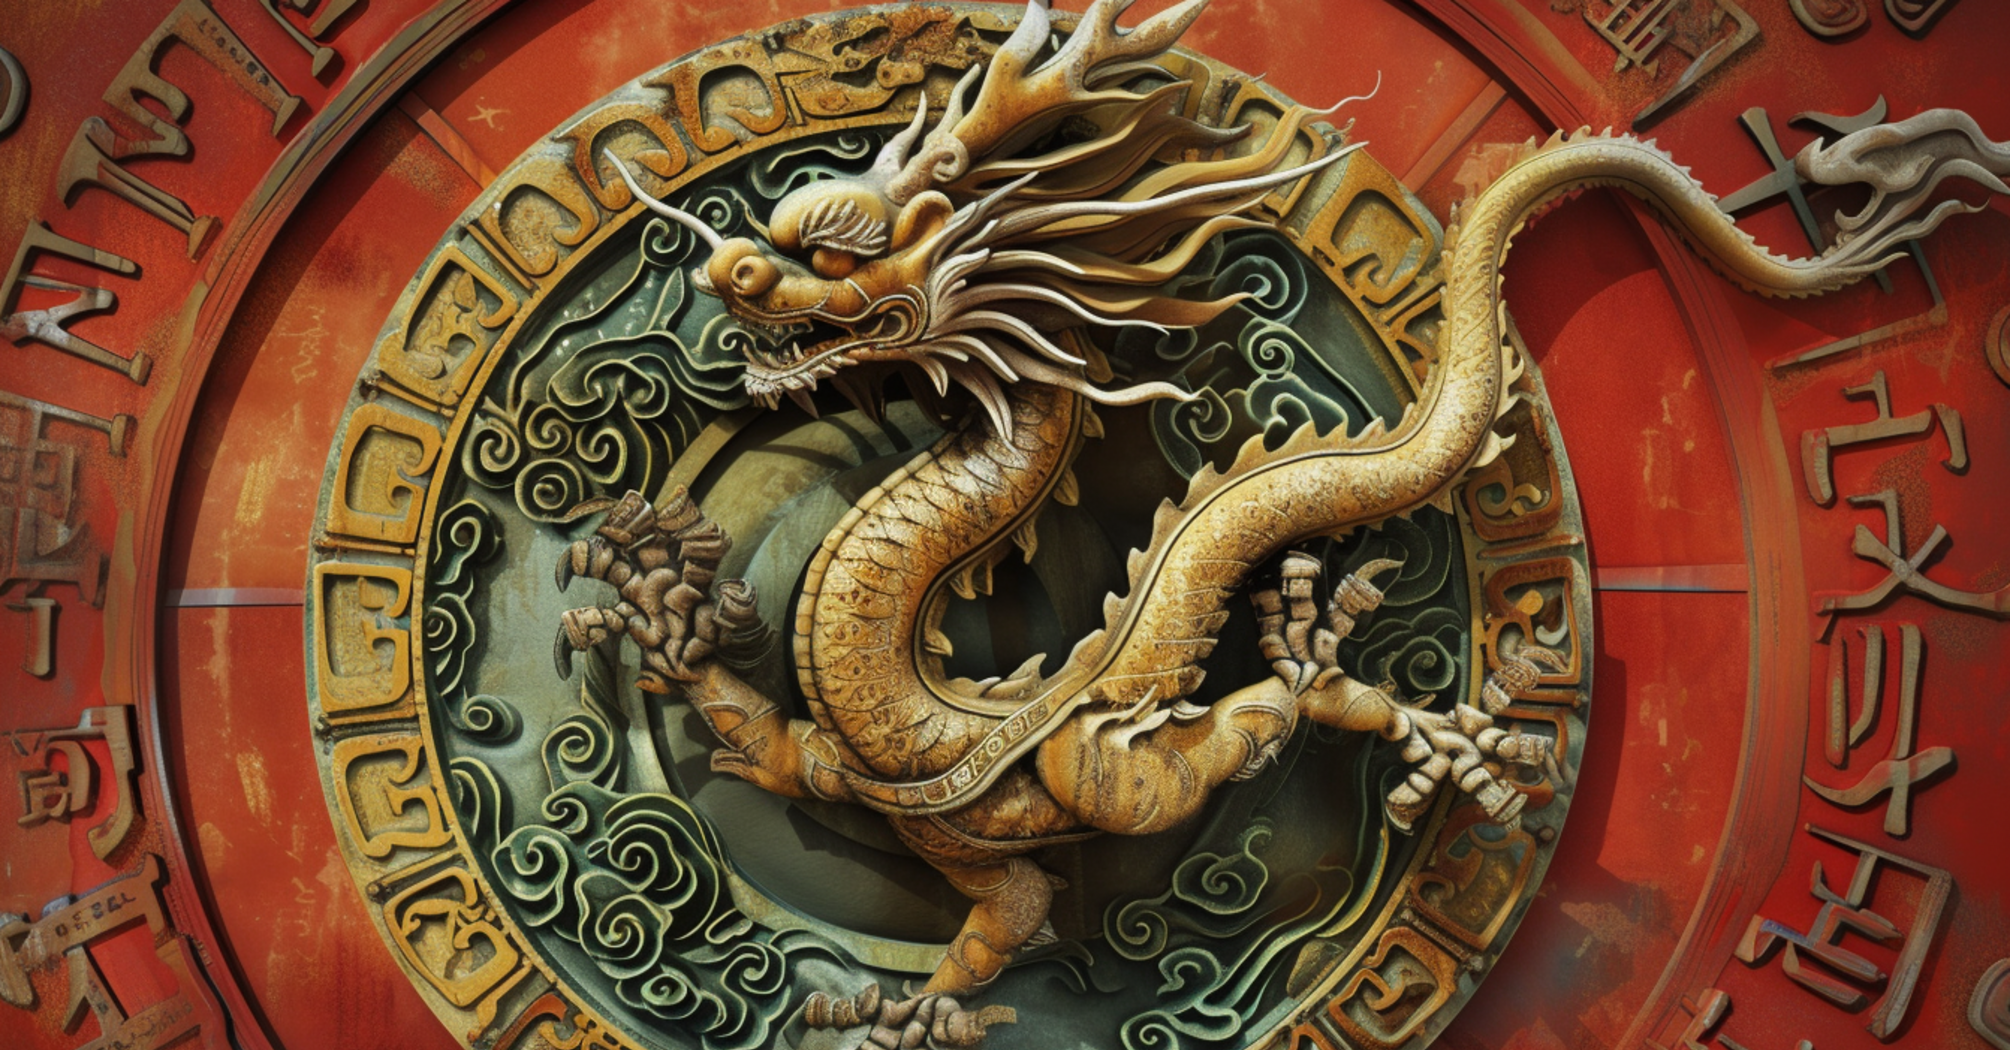 Unexpected difficulties may arise: Chinese horoscope for March 1st